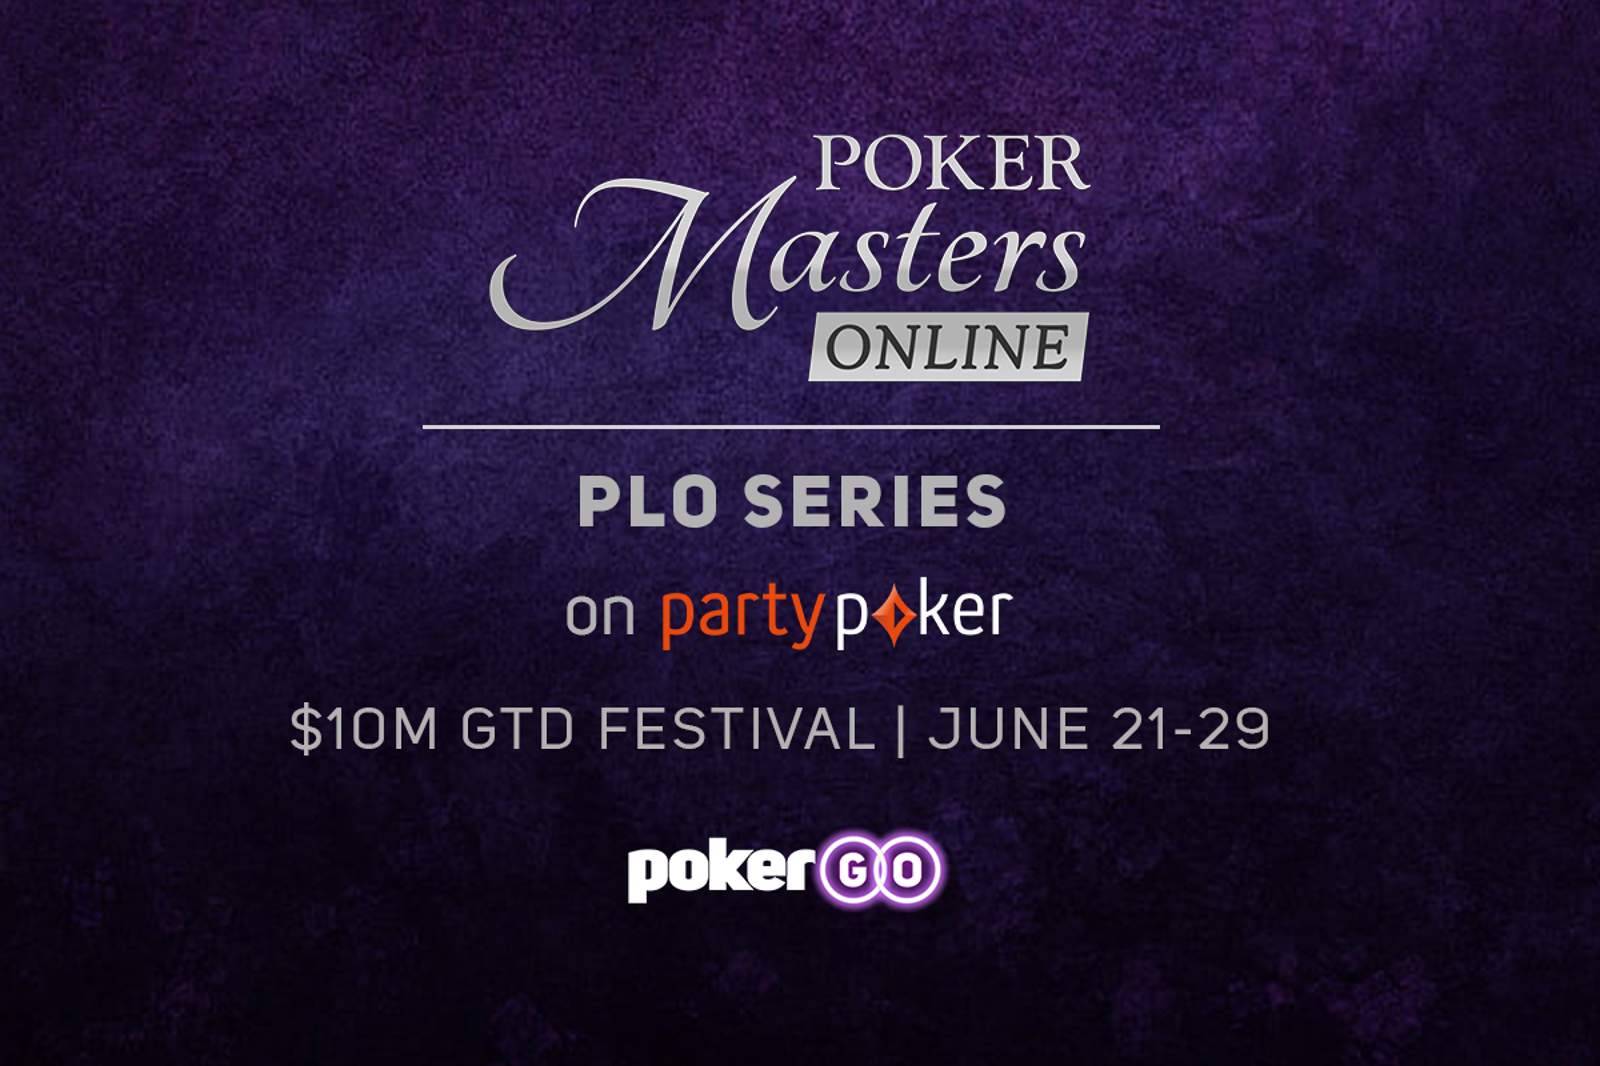 Poker Central Announces Poker Masters Online PLO Series on partypoker